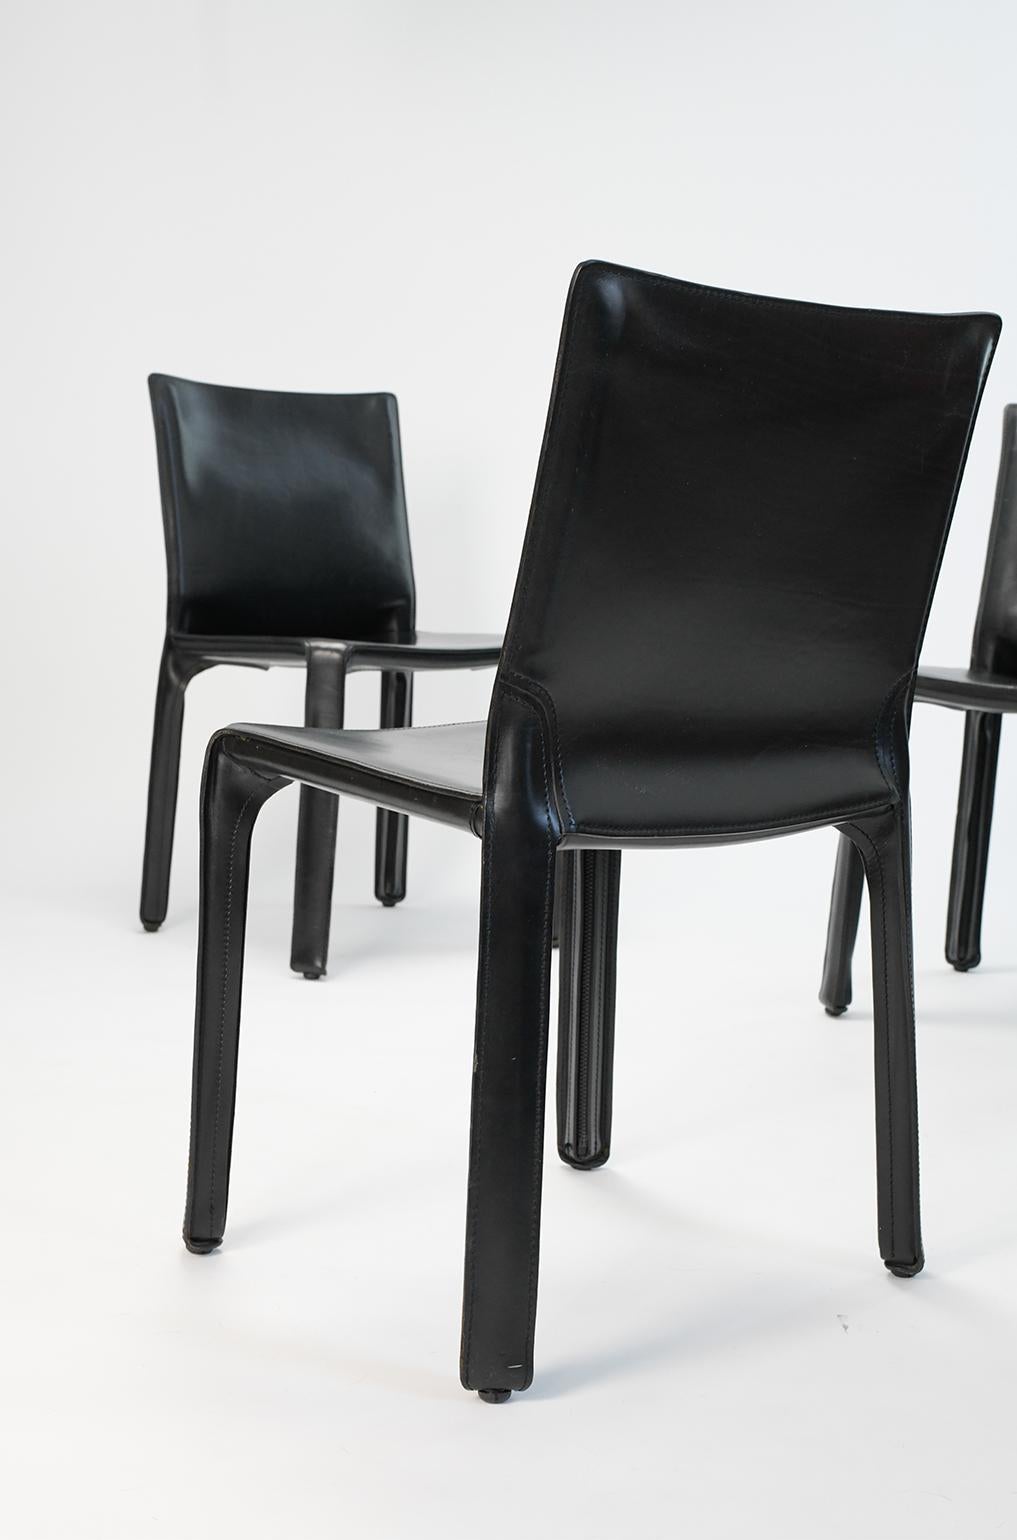 Mario Bellini Cab Chairs by Cassina - Set of Four  For Sale 1